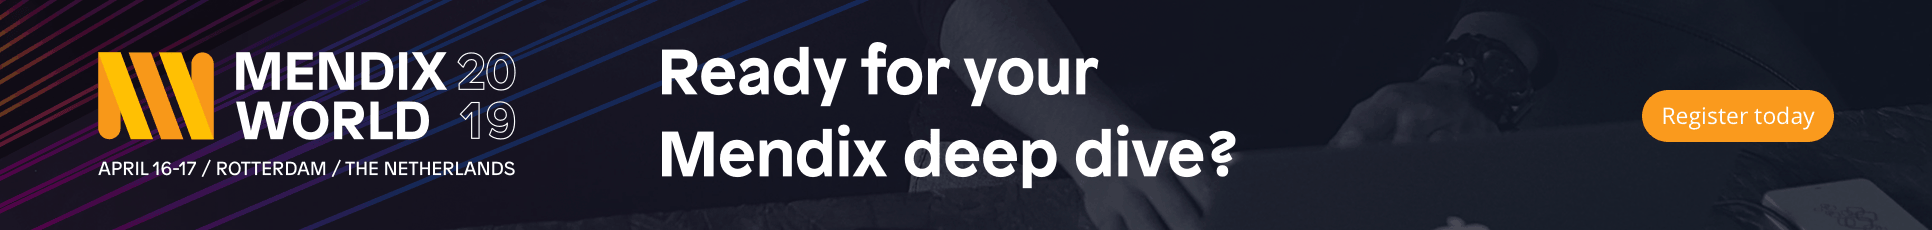 Mendix World 2019 - Ready for Your Deep Dive? Register Today.